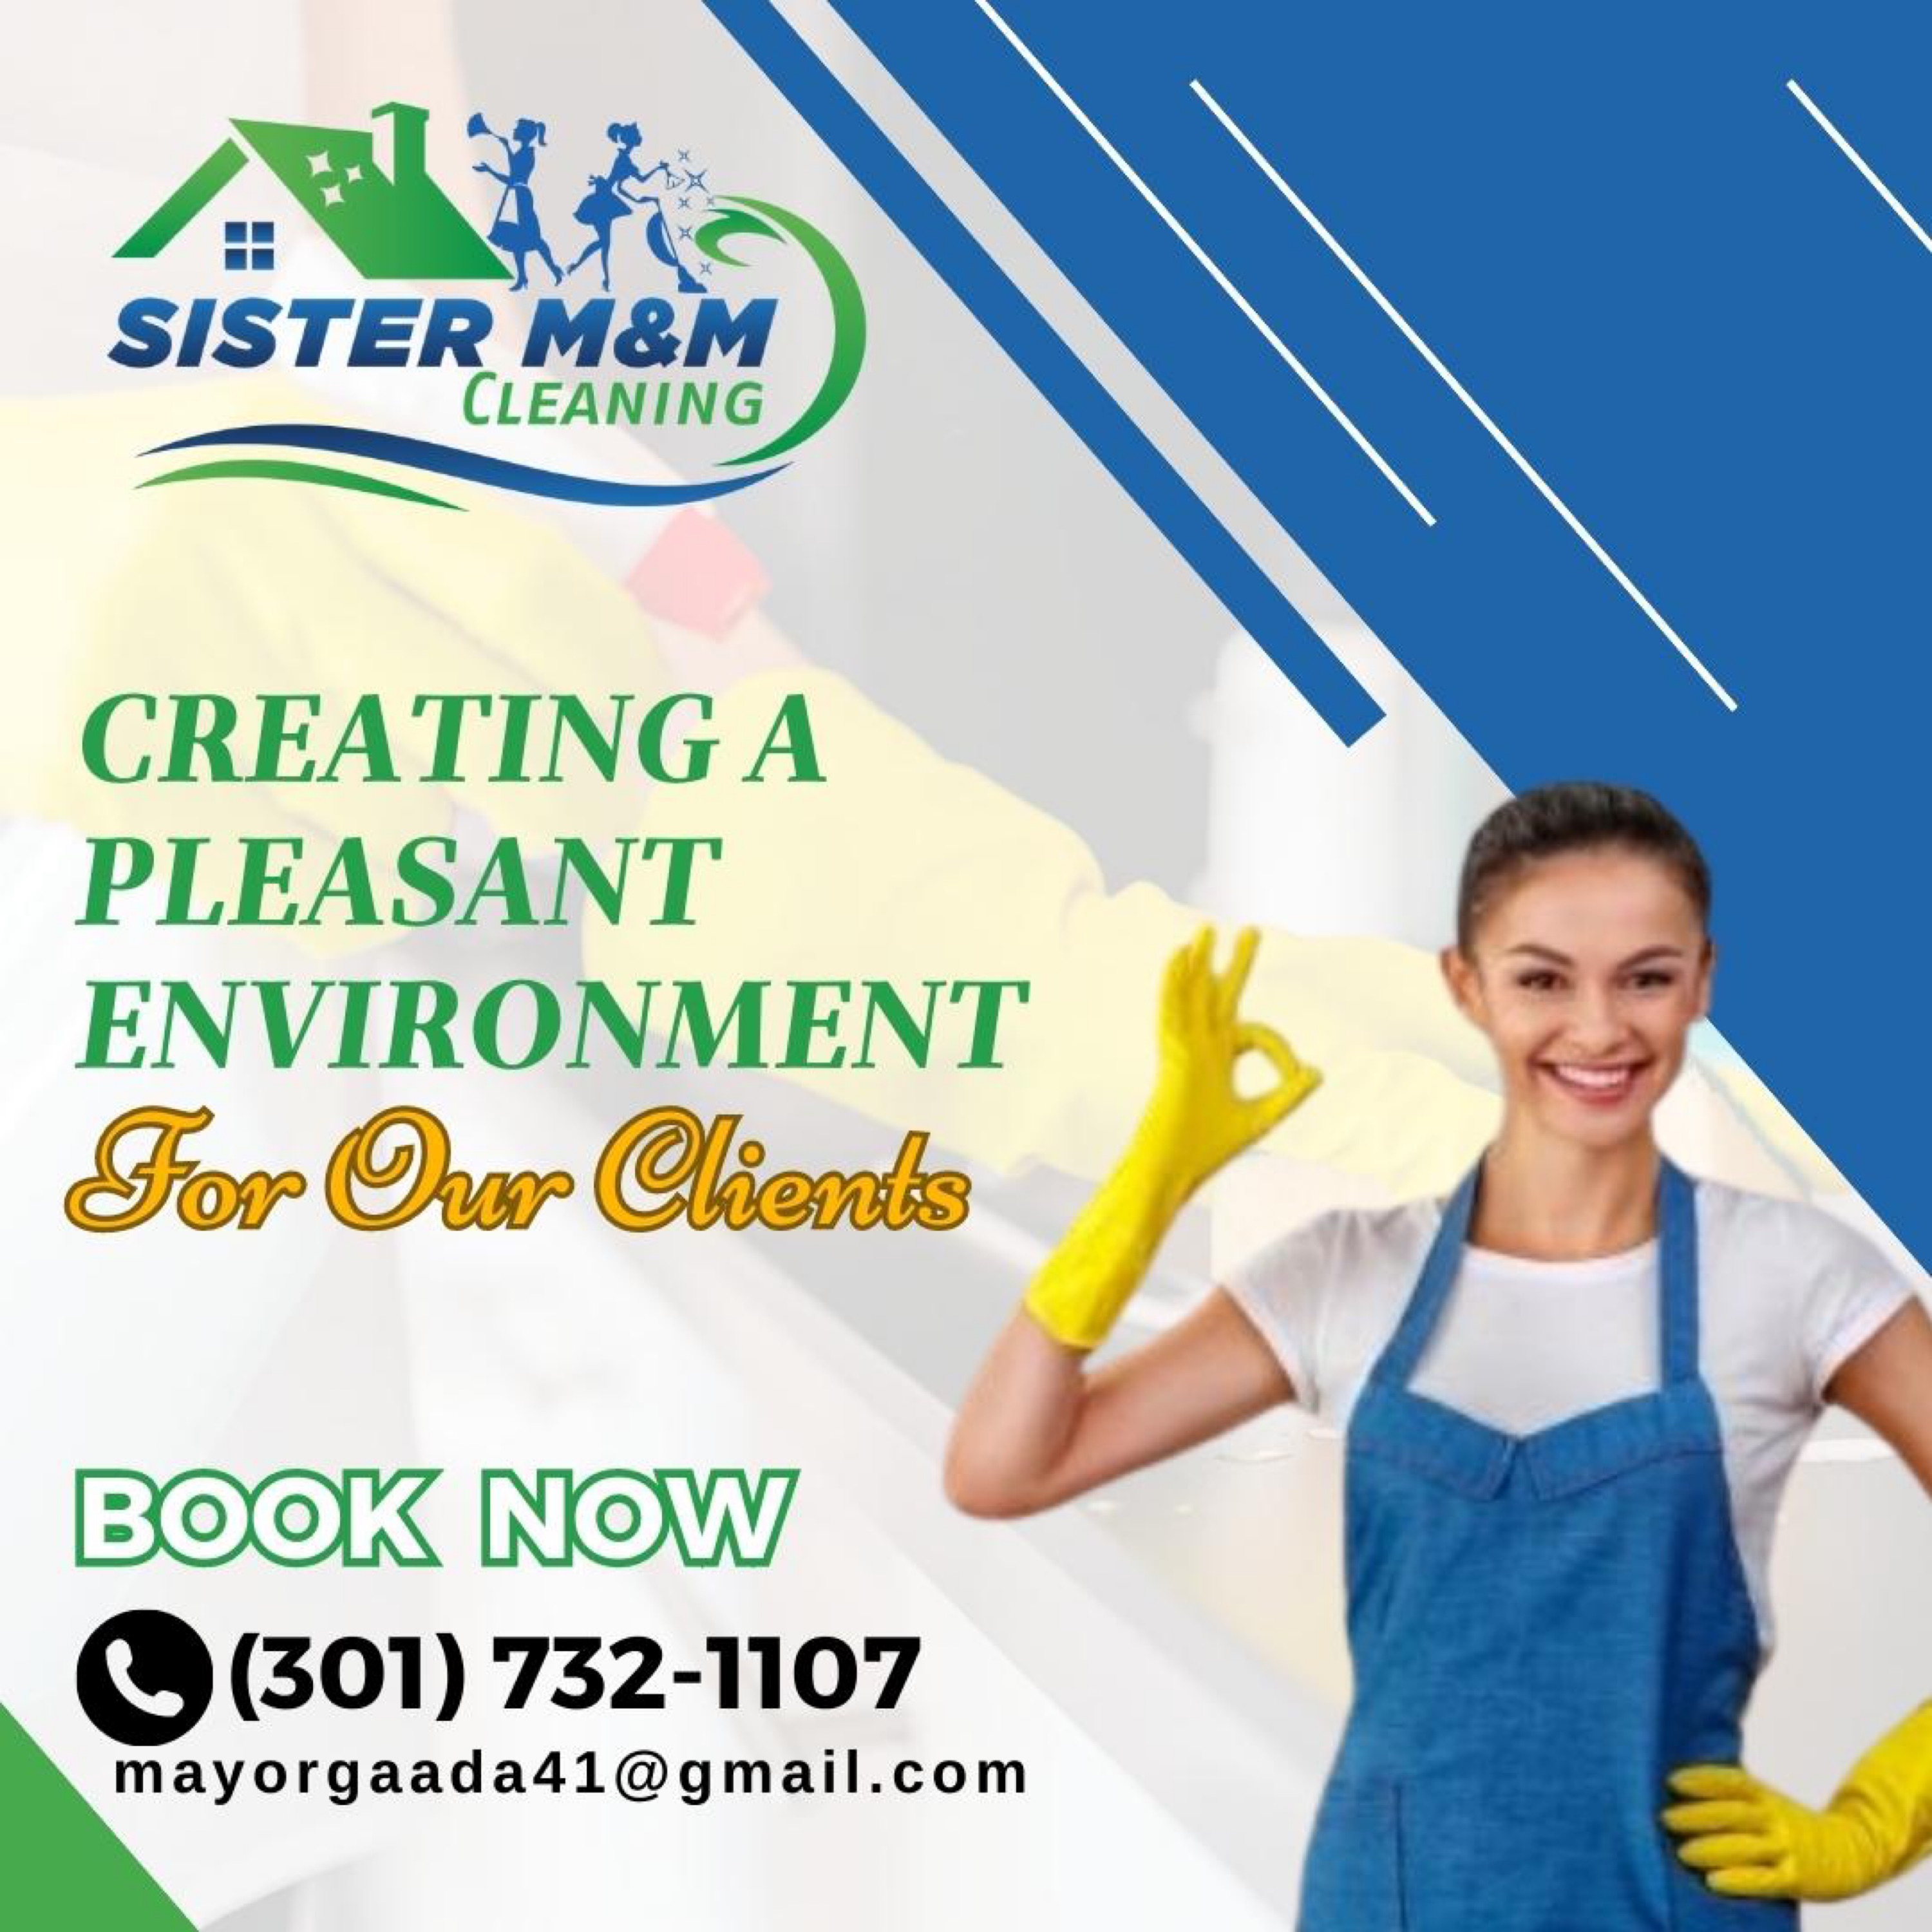 Sister M&M Cleaning Service Logo